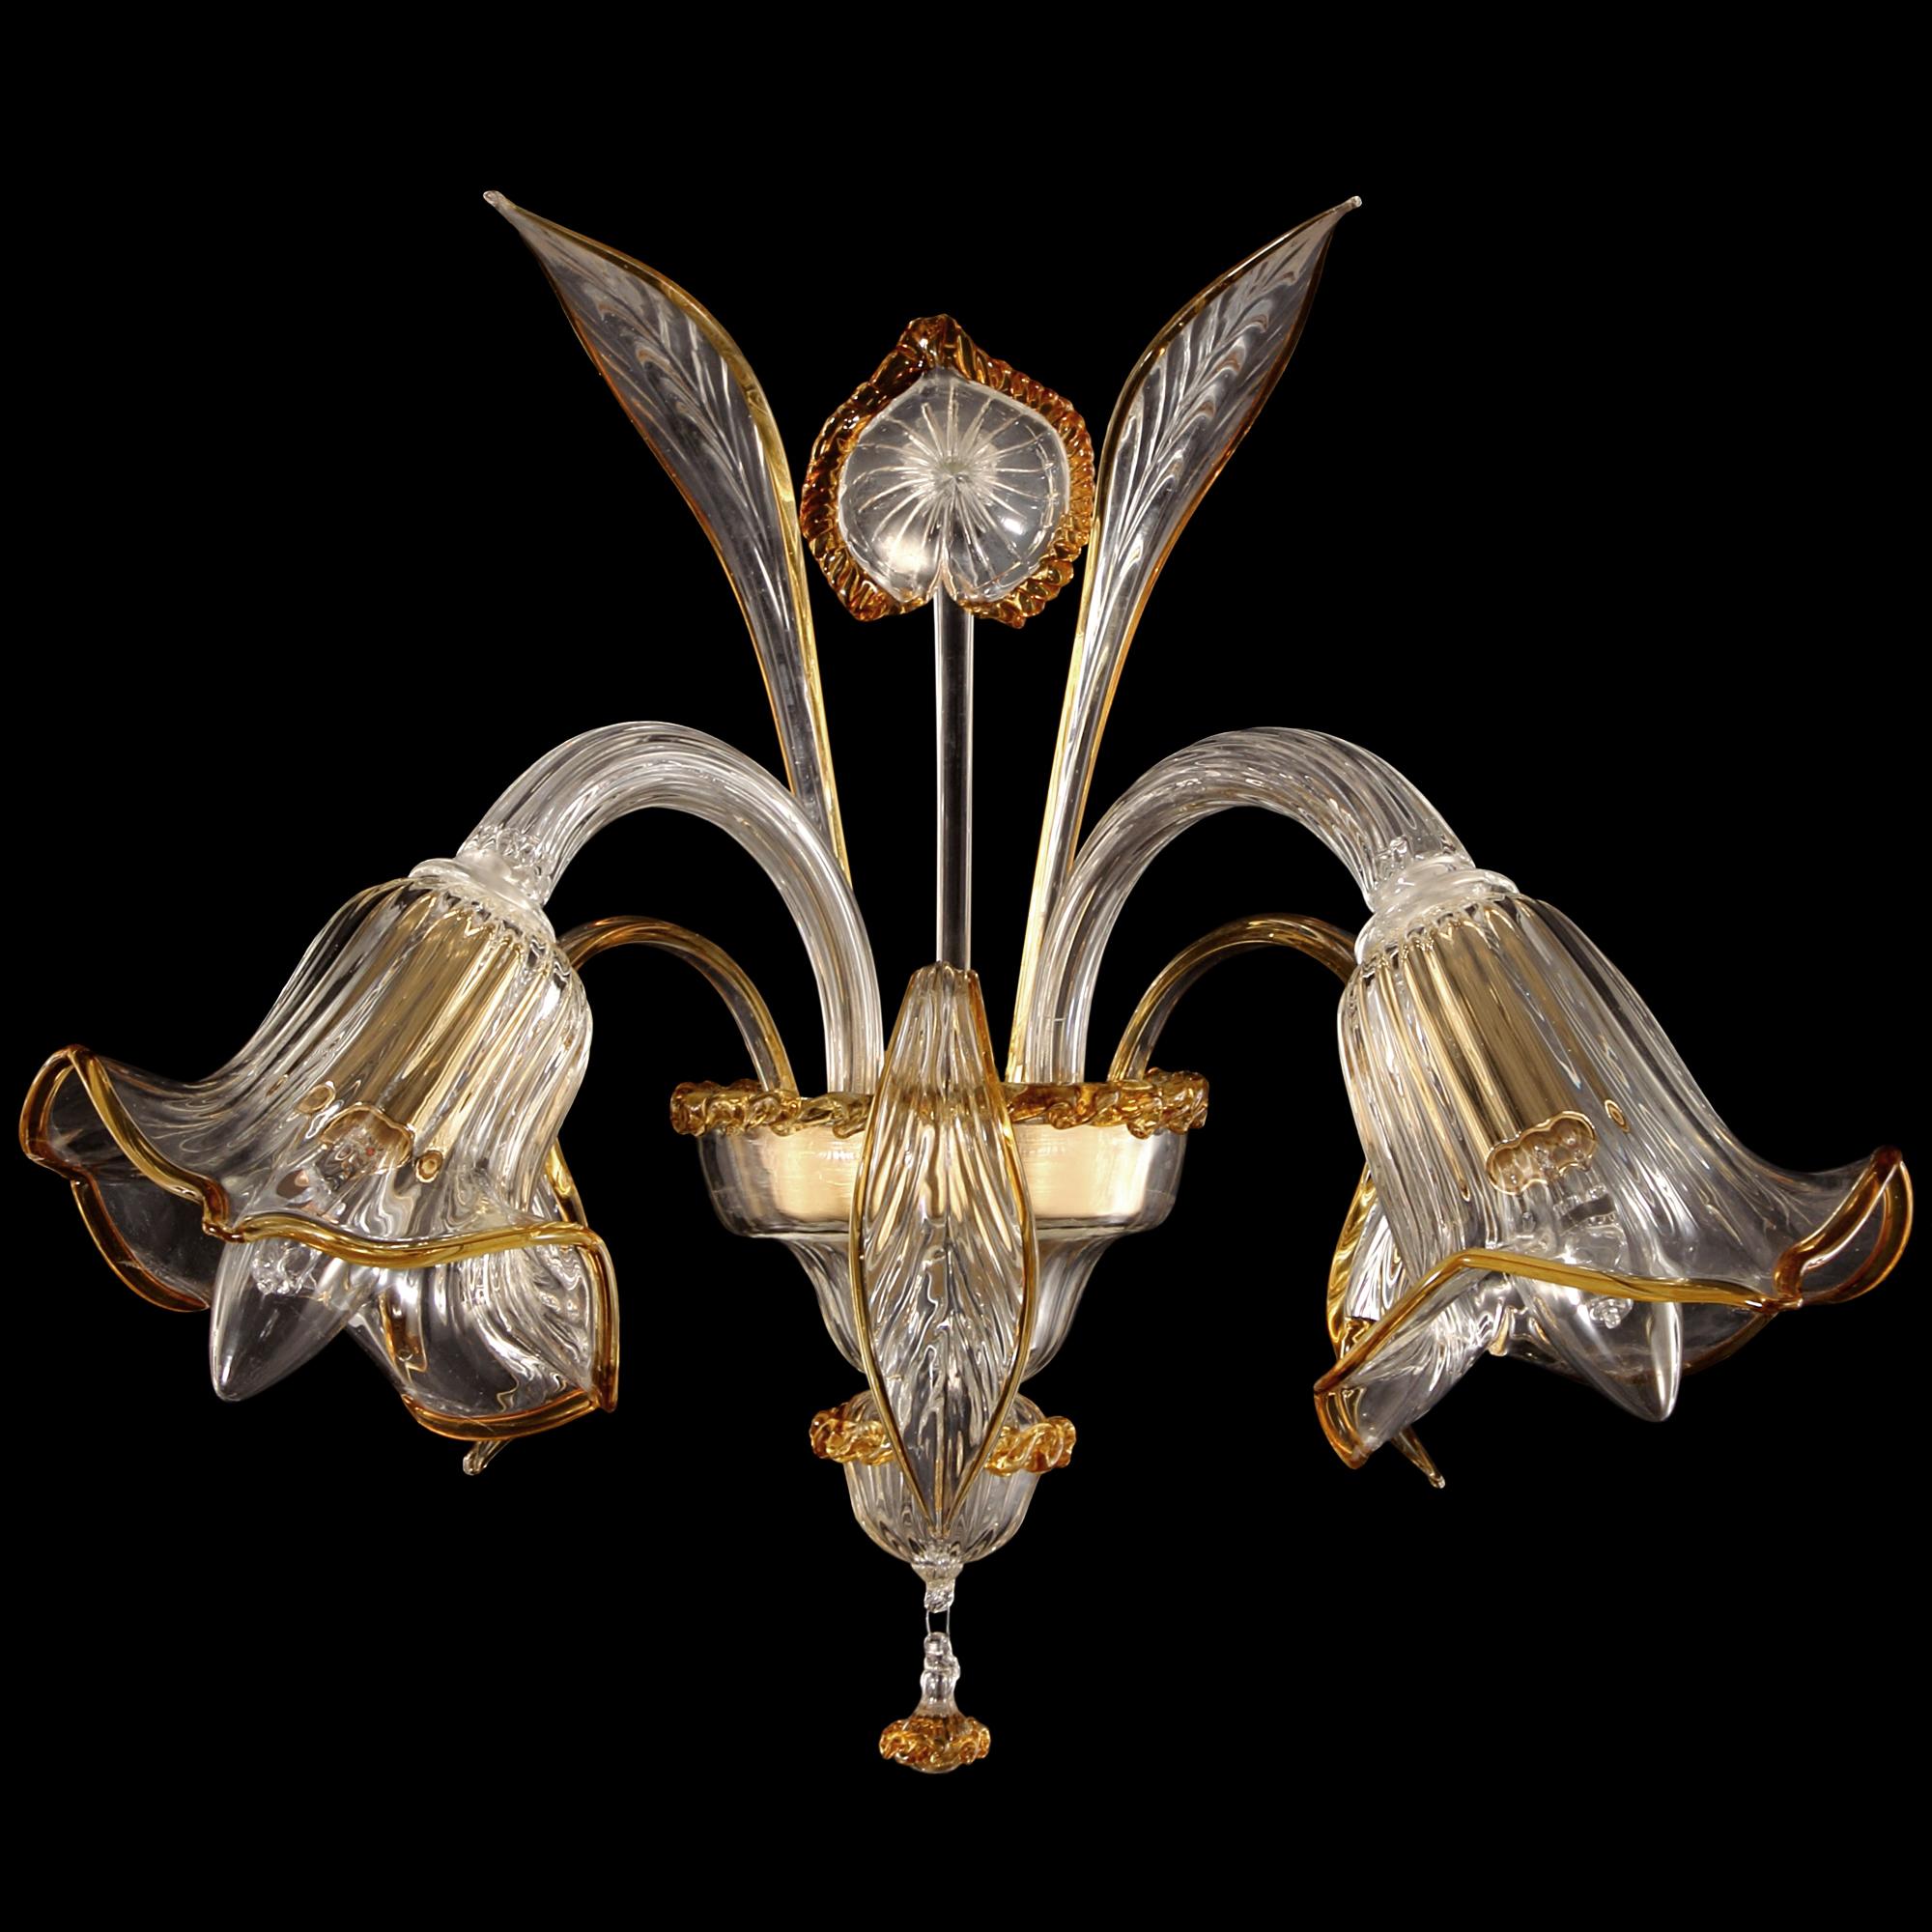 The venetian sconce Accadueo presents an organic design, which is the result of an inspiration taken from the nature. The cups and some details remind the fluid flow of the water, a vital element which symbolises the pureness, the simplicity, the